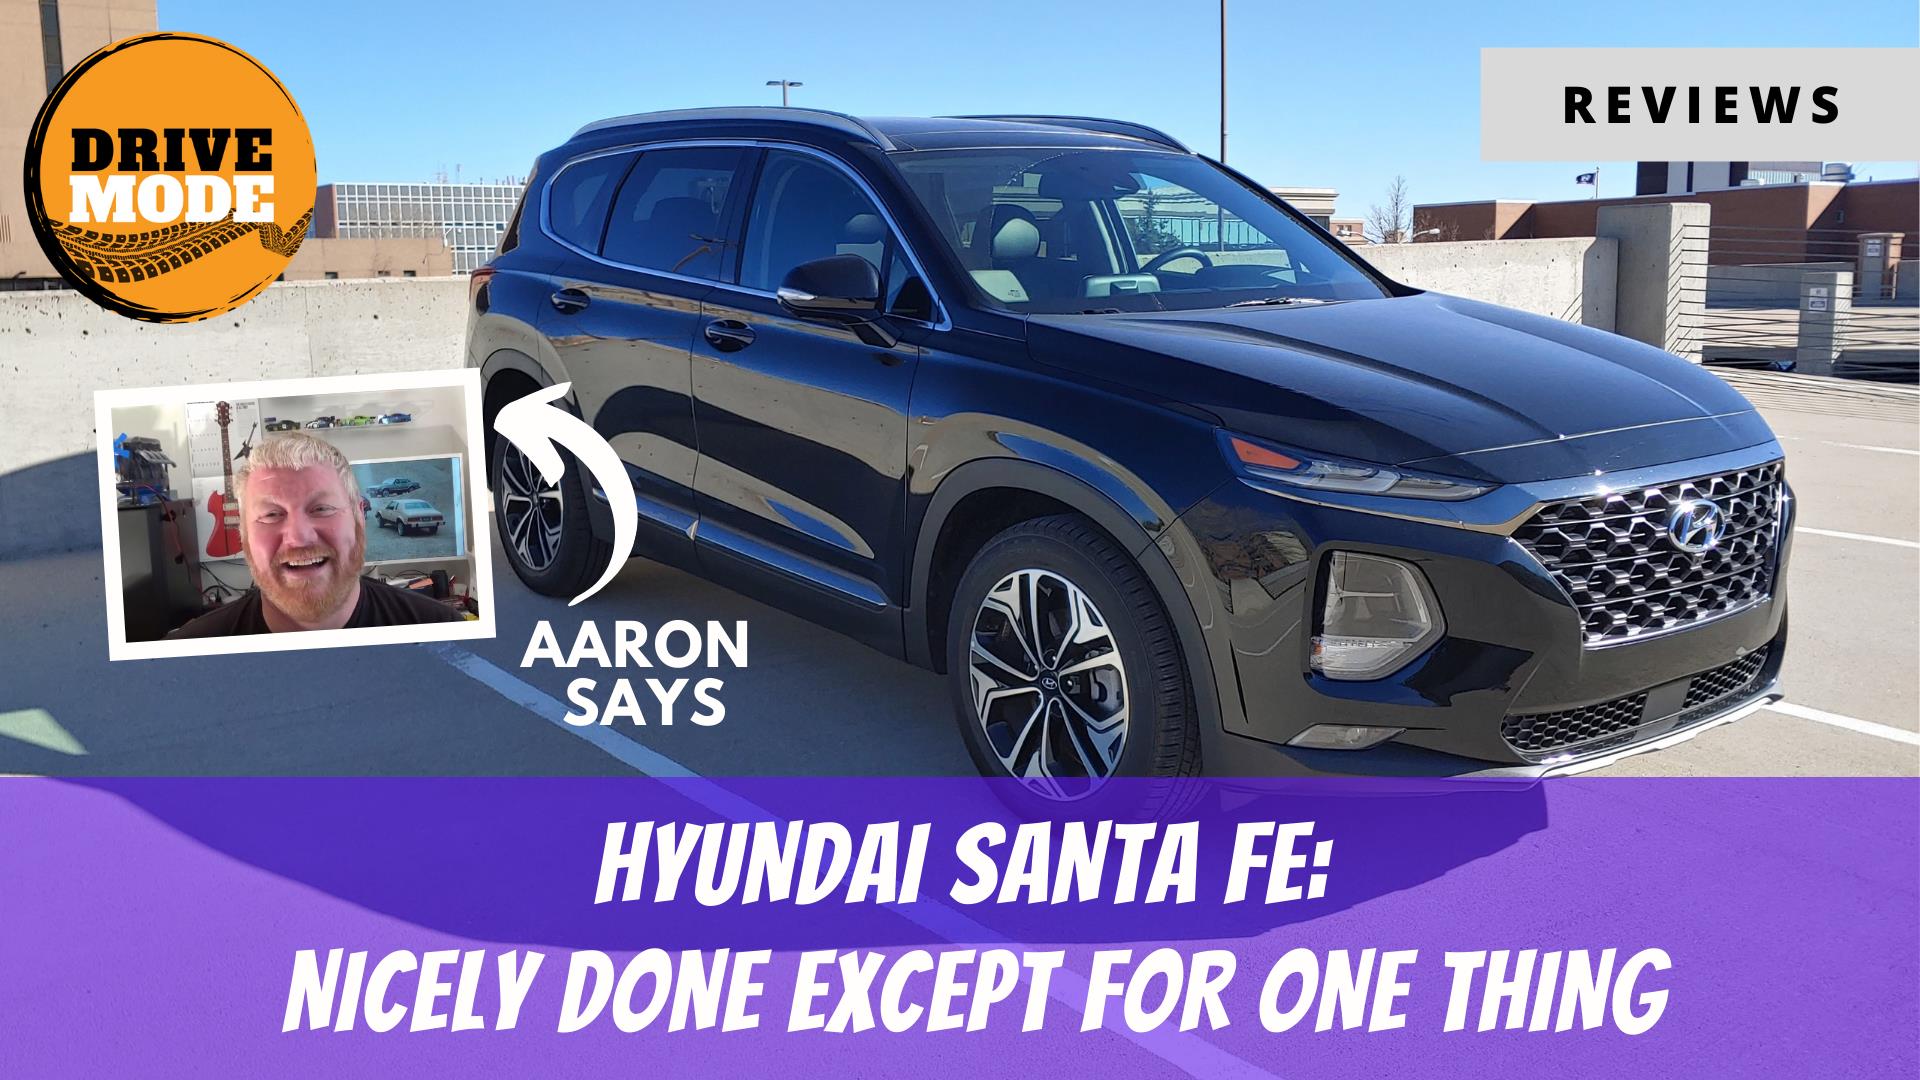 2020 Hyundai Santa Fe Review Reveals It’s Nicely Done